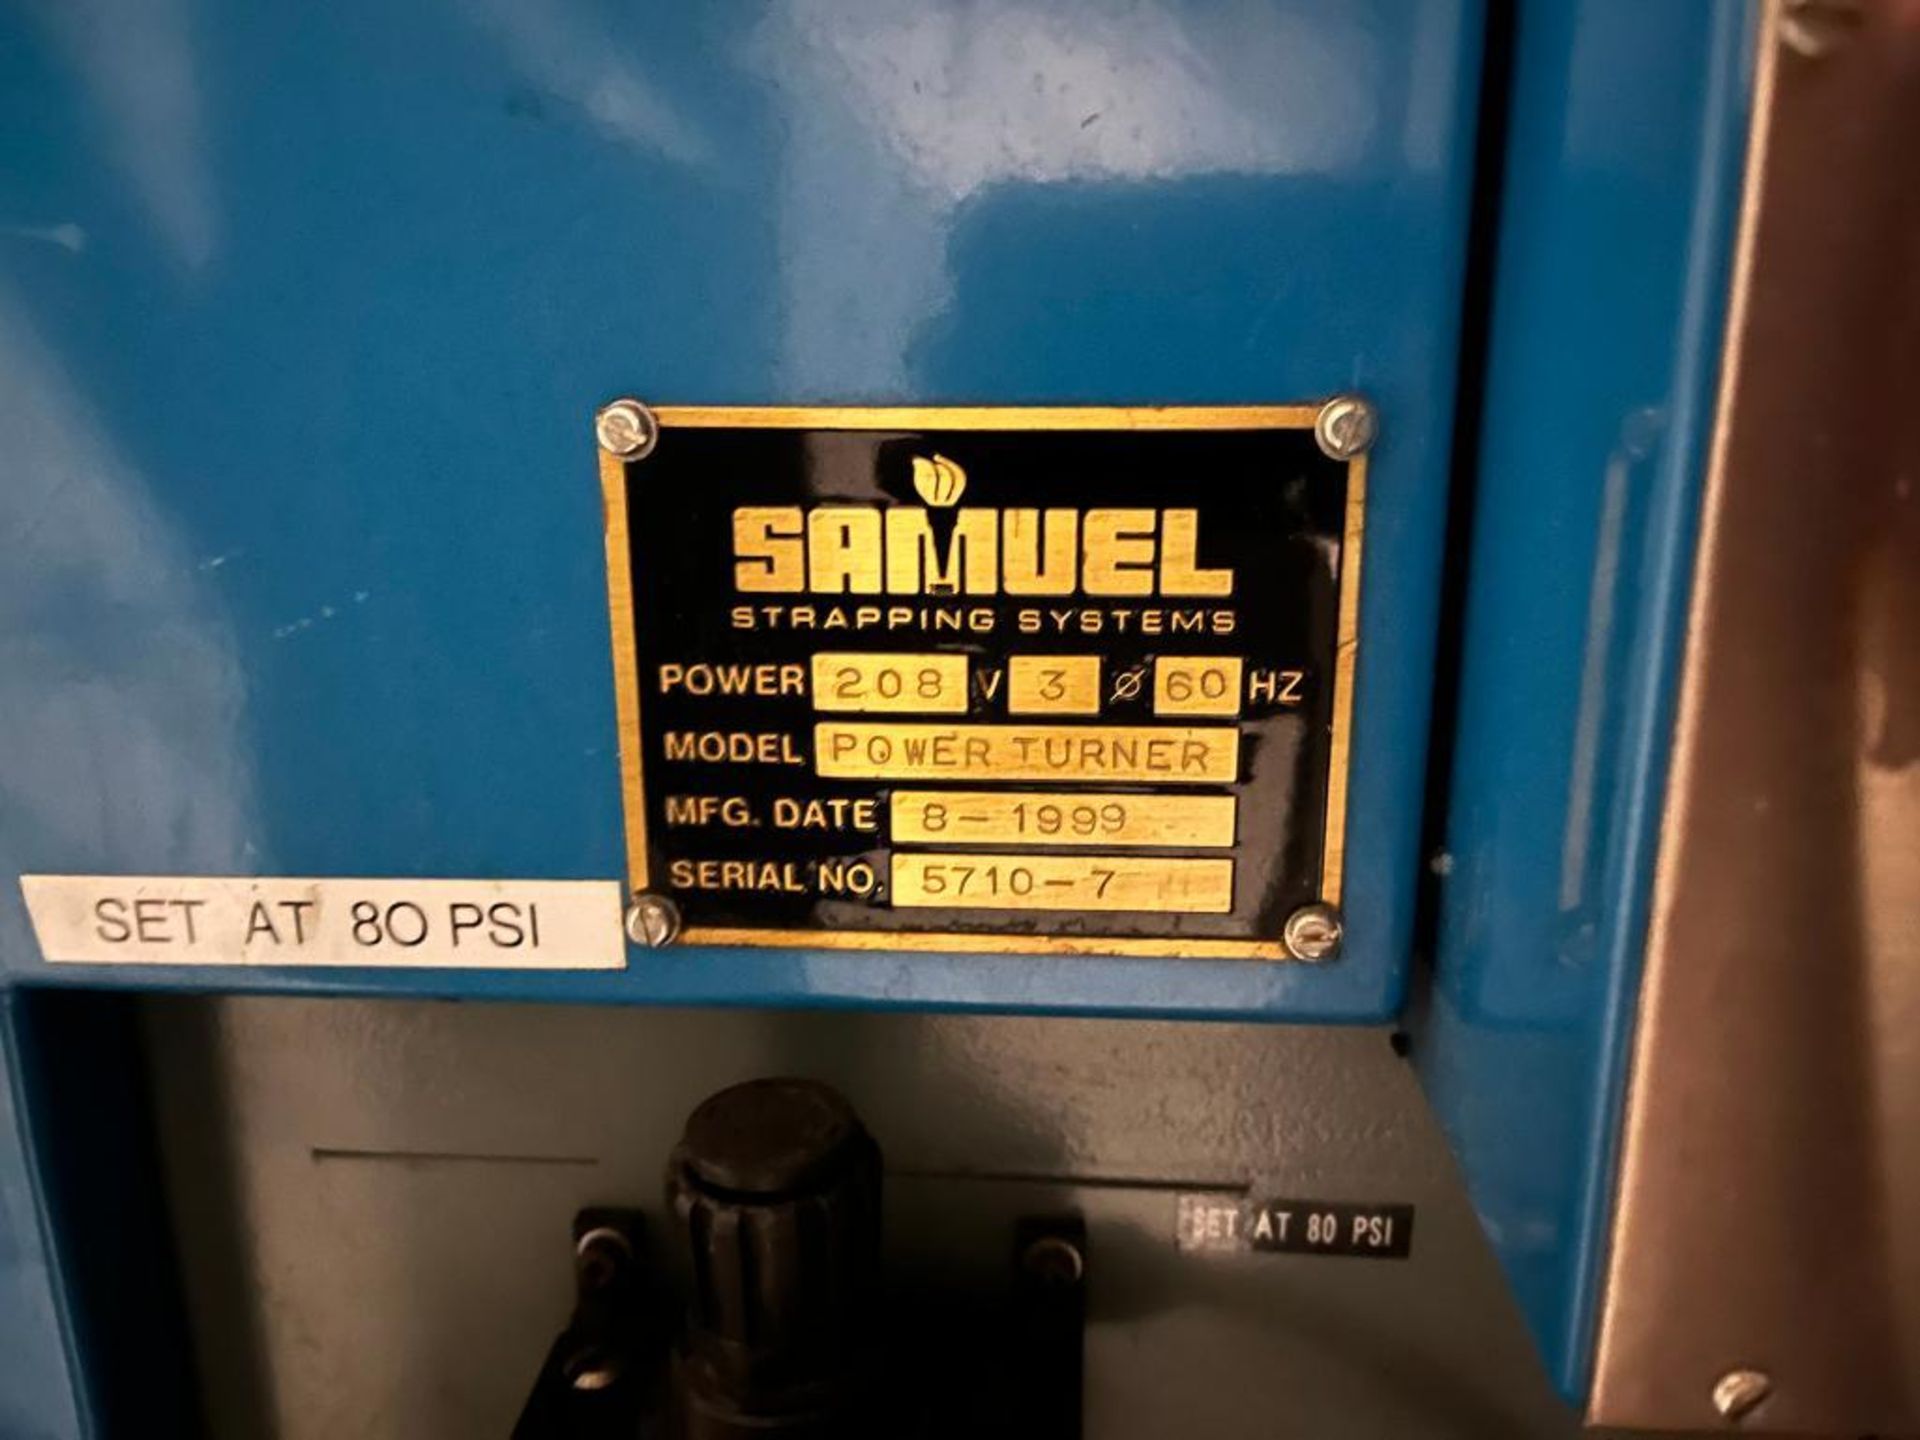 Samuel Strapping Systems Power Turner, S/N 5710-7 (1999) - Image 3 of 3